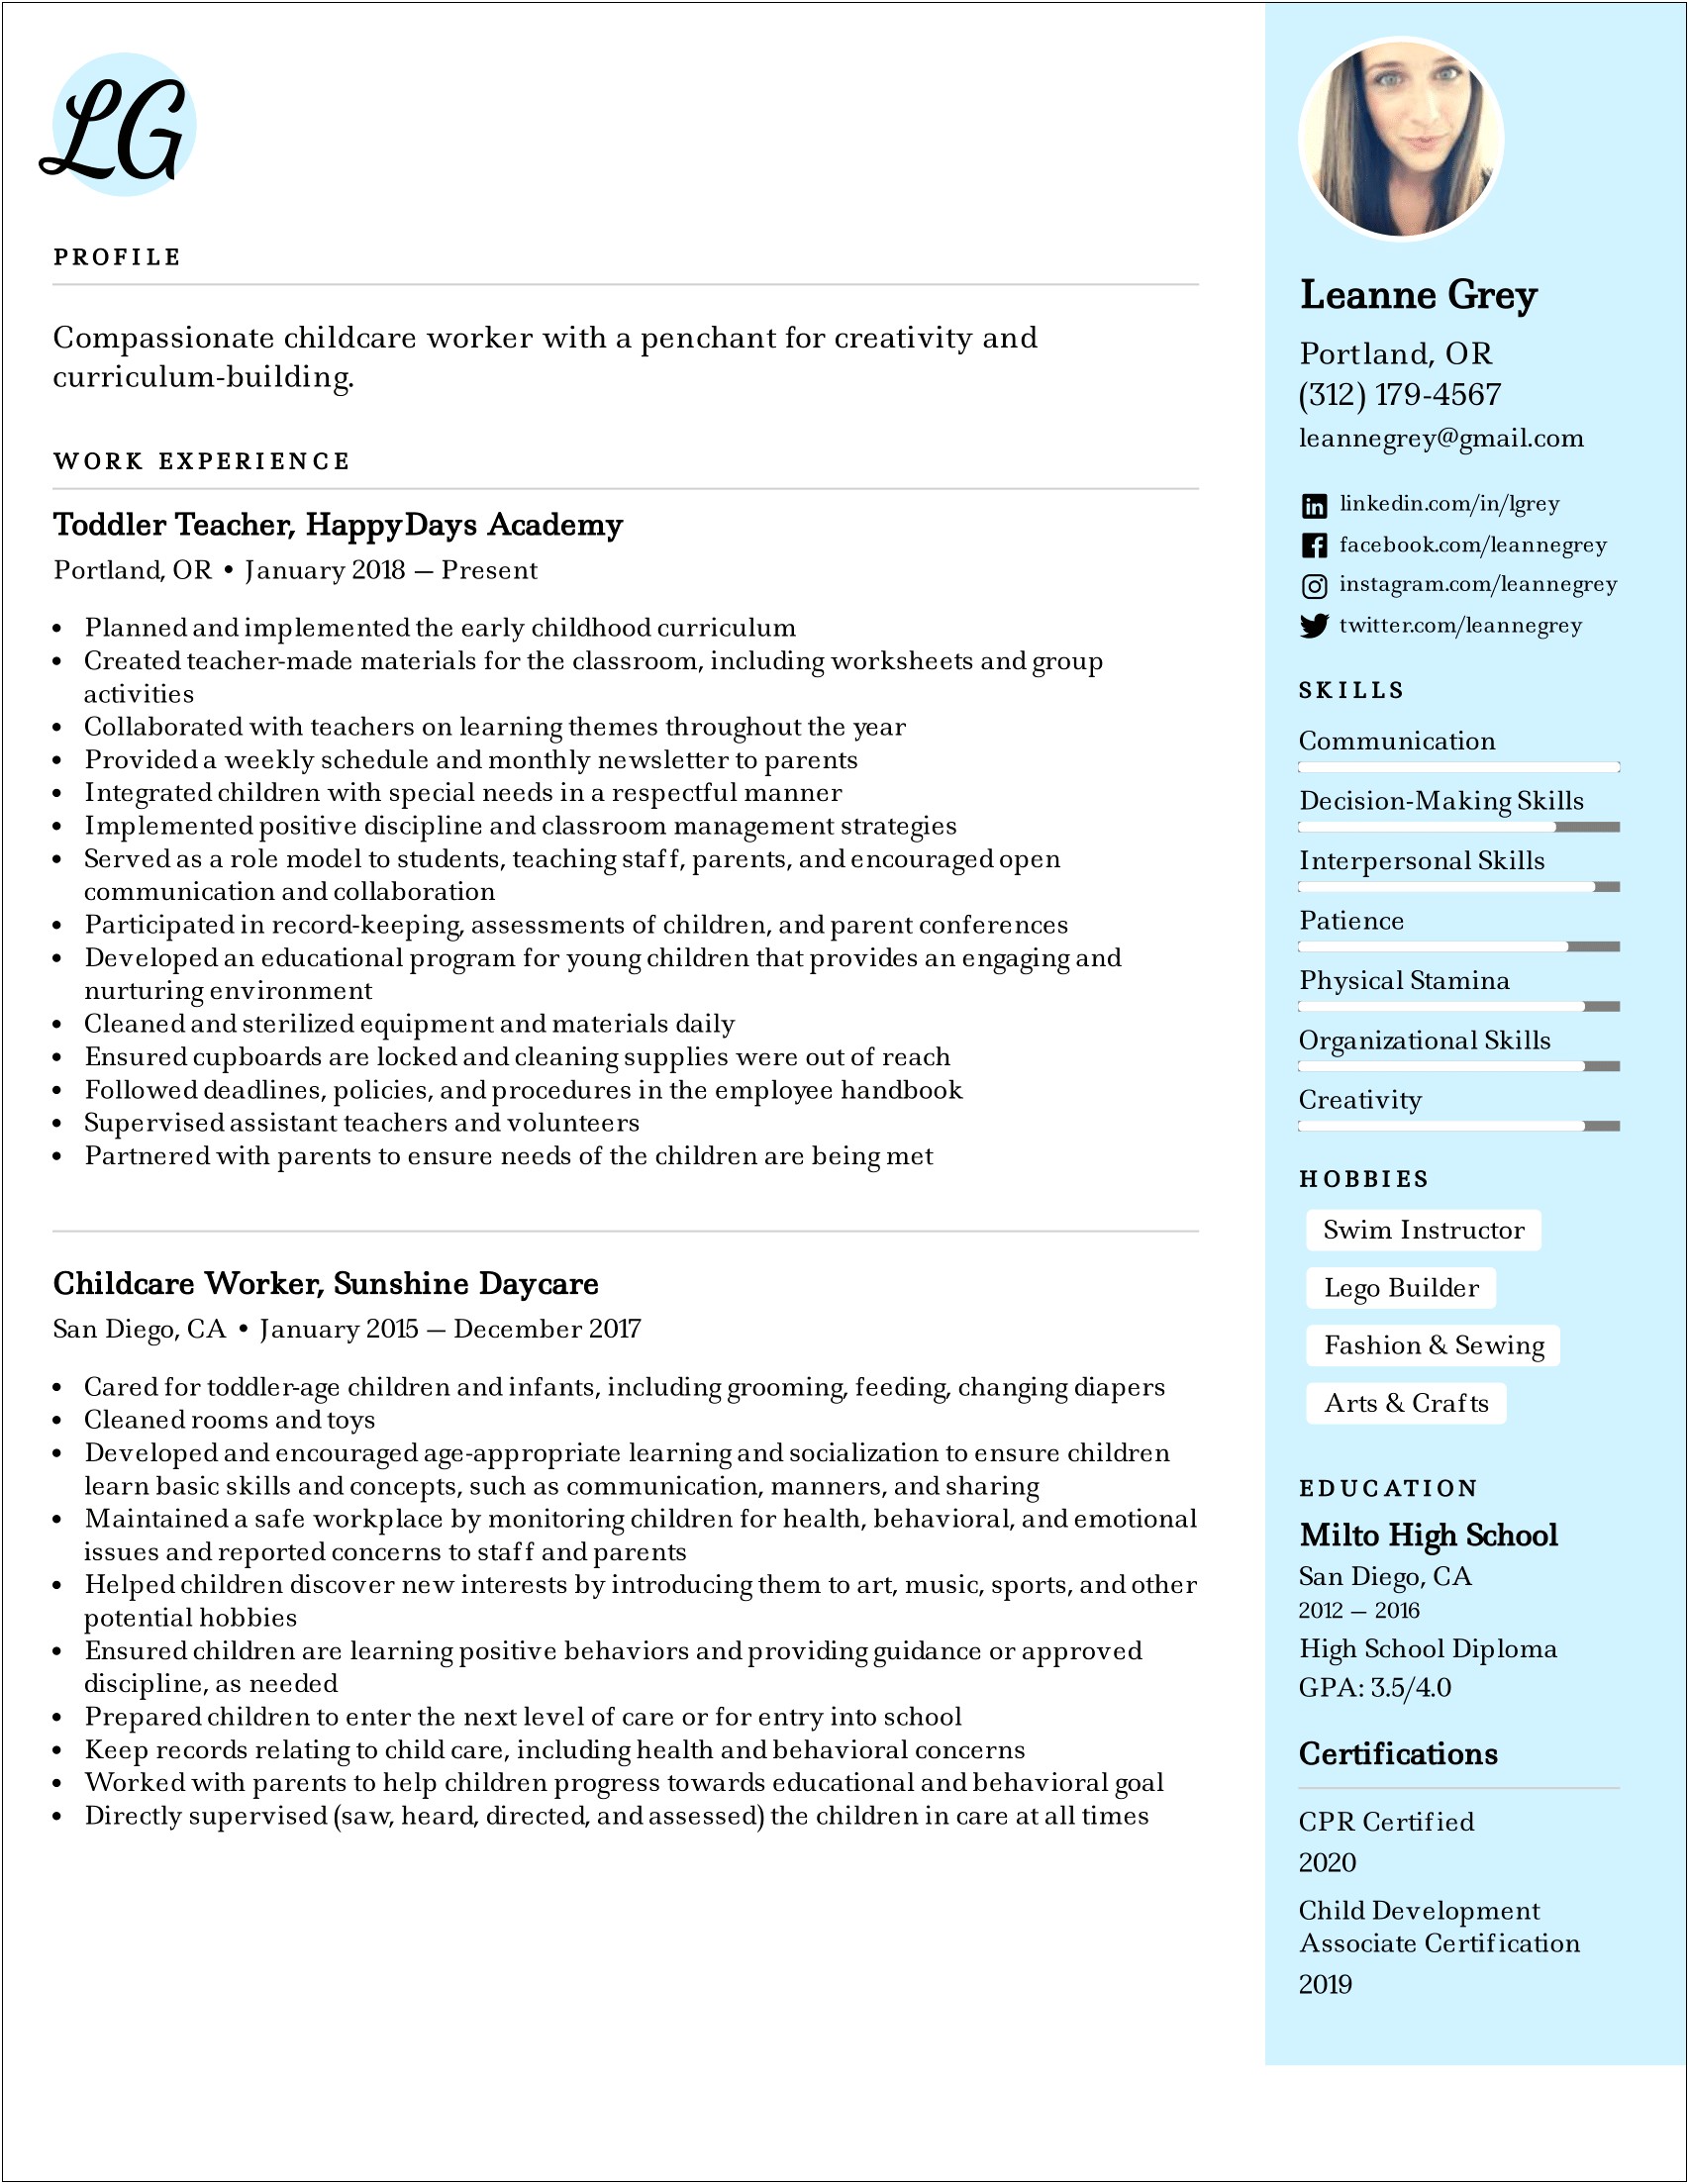 Resume Skills And Abilities Section Example